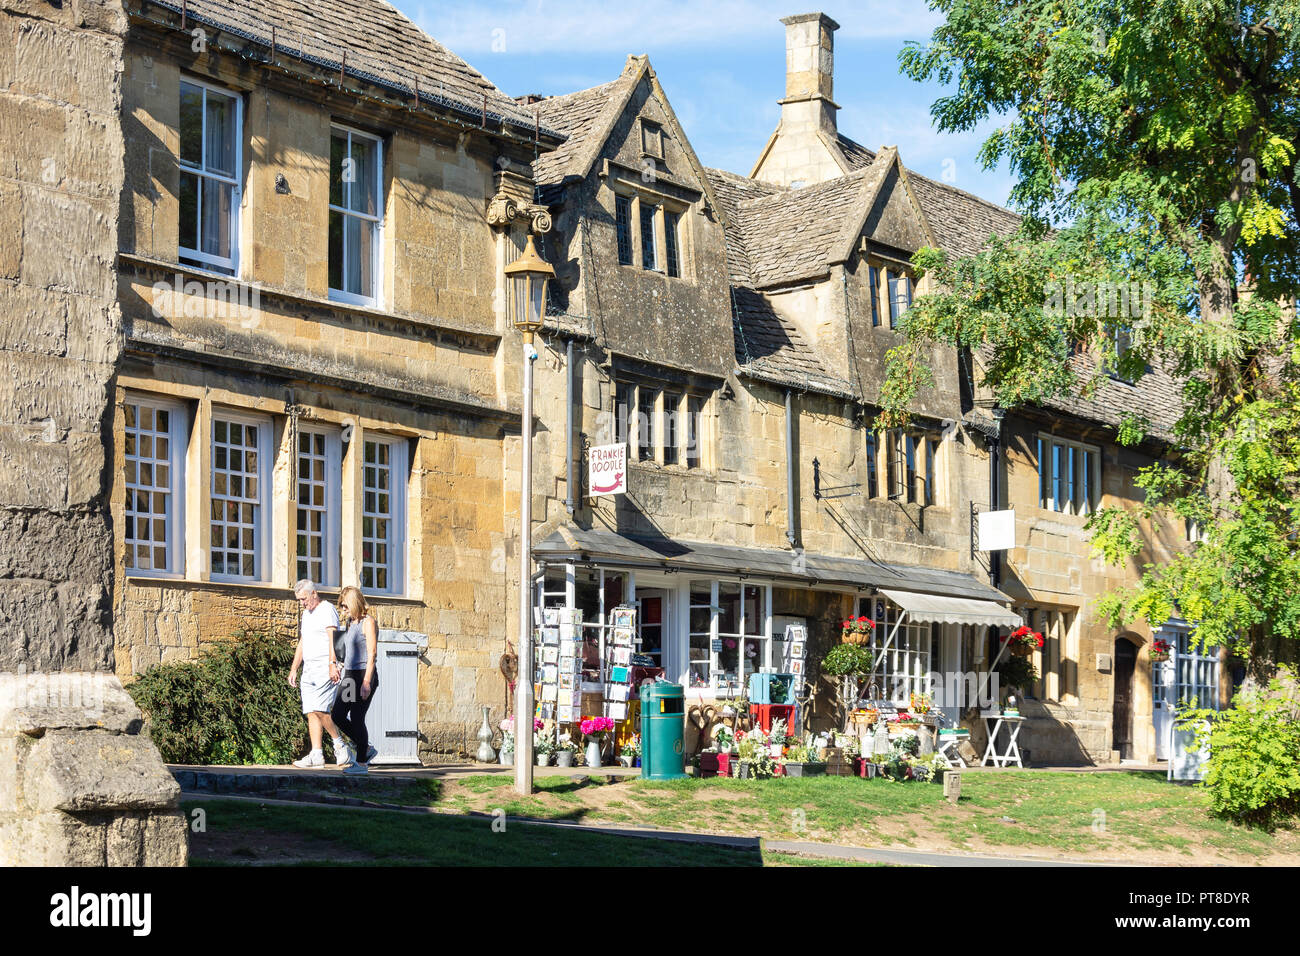 High Street, Chipping Campden, Gloucestershire, England, United Kingdom Stock Photo